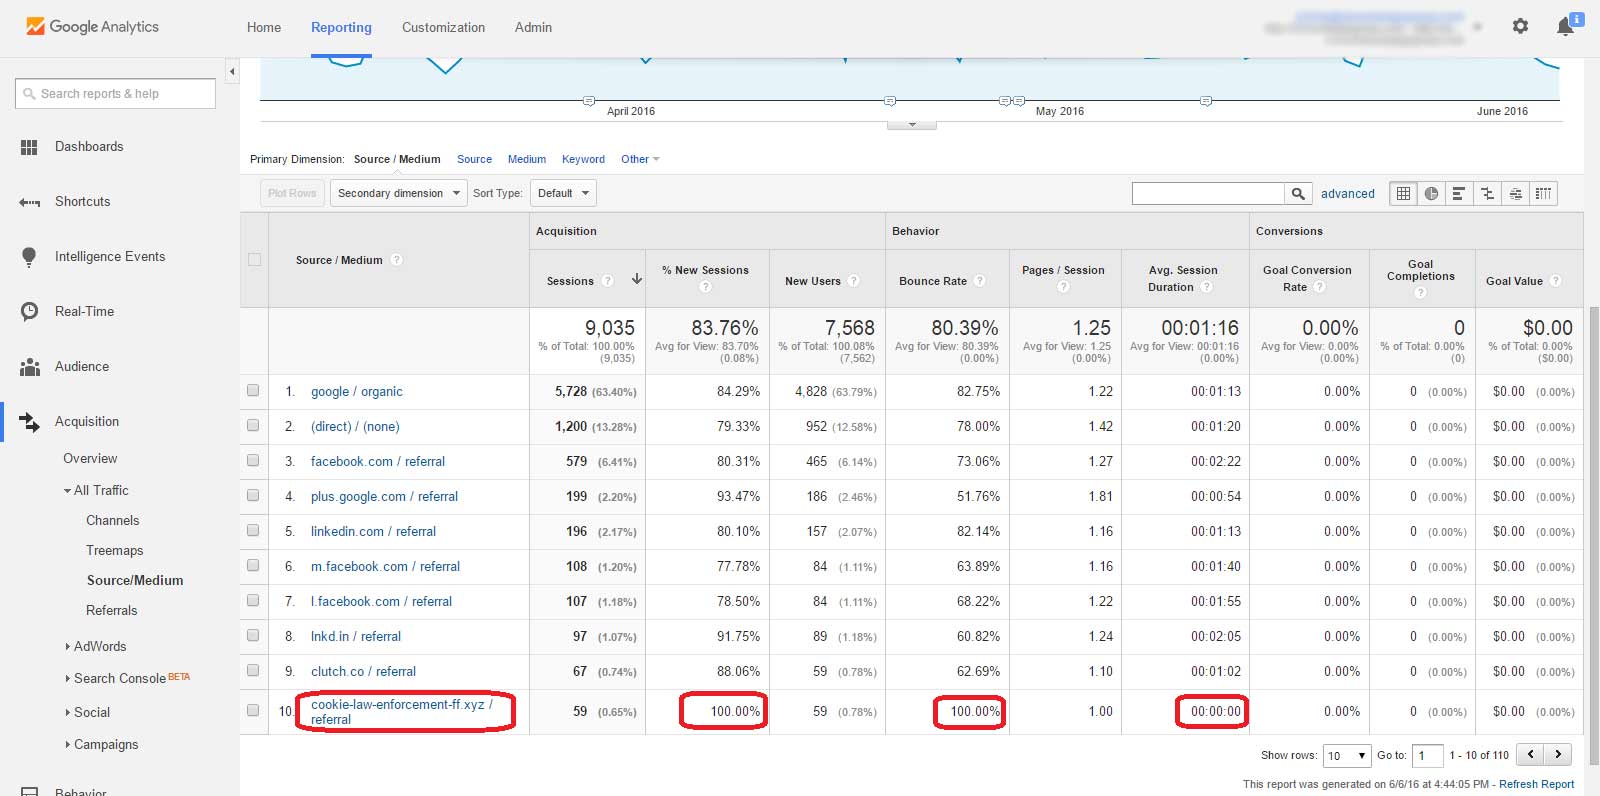 Google Analytics Report, Acquisition, Top Sources and Mediums